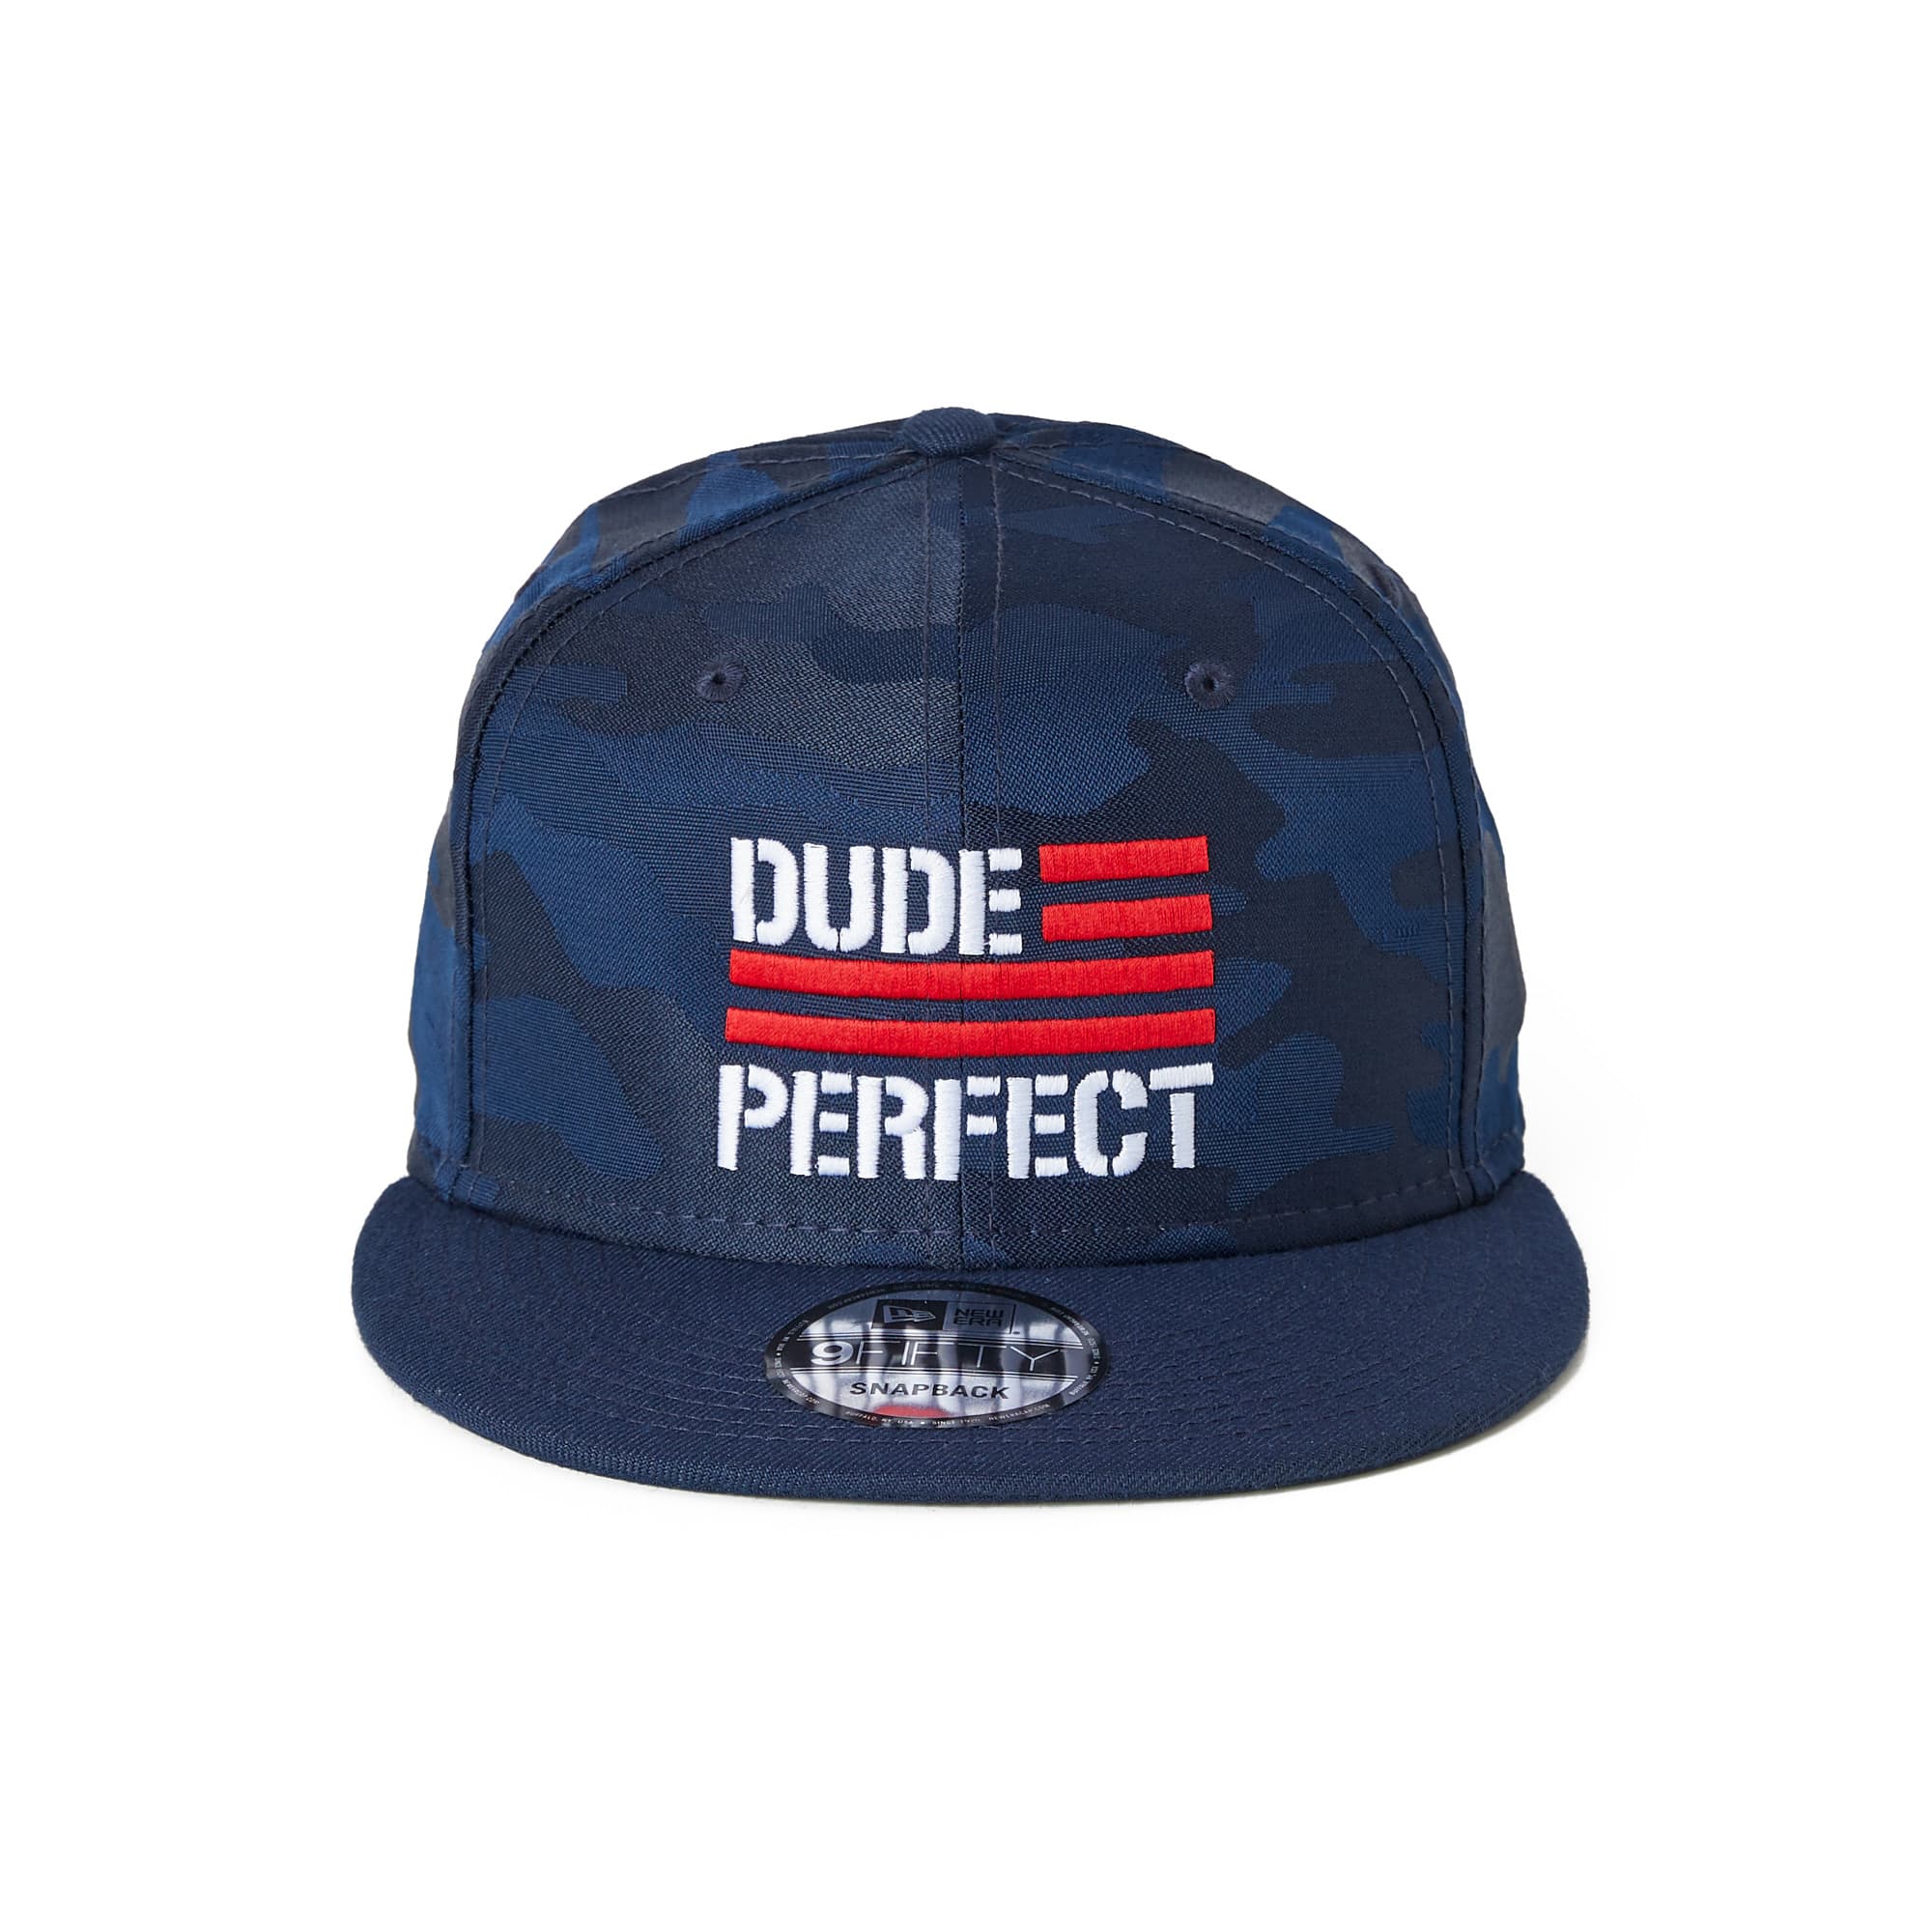 Hats | Dude Perfect Official